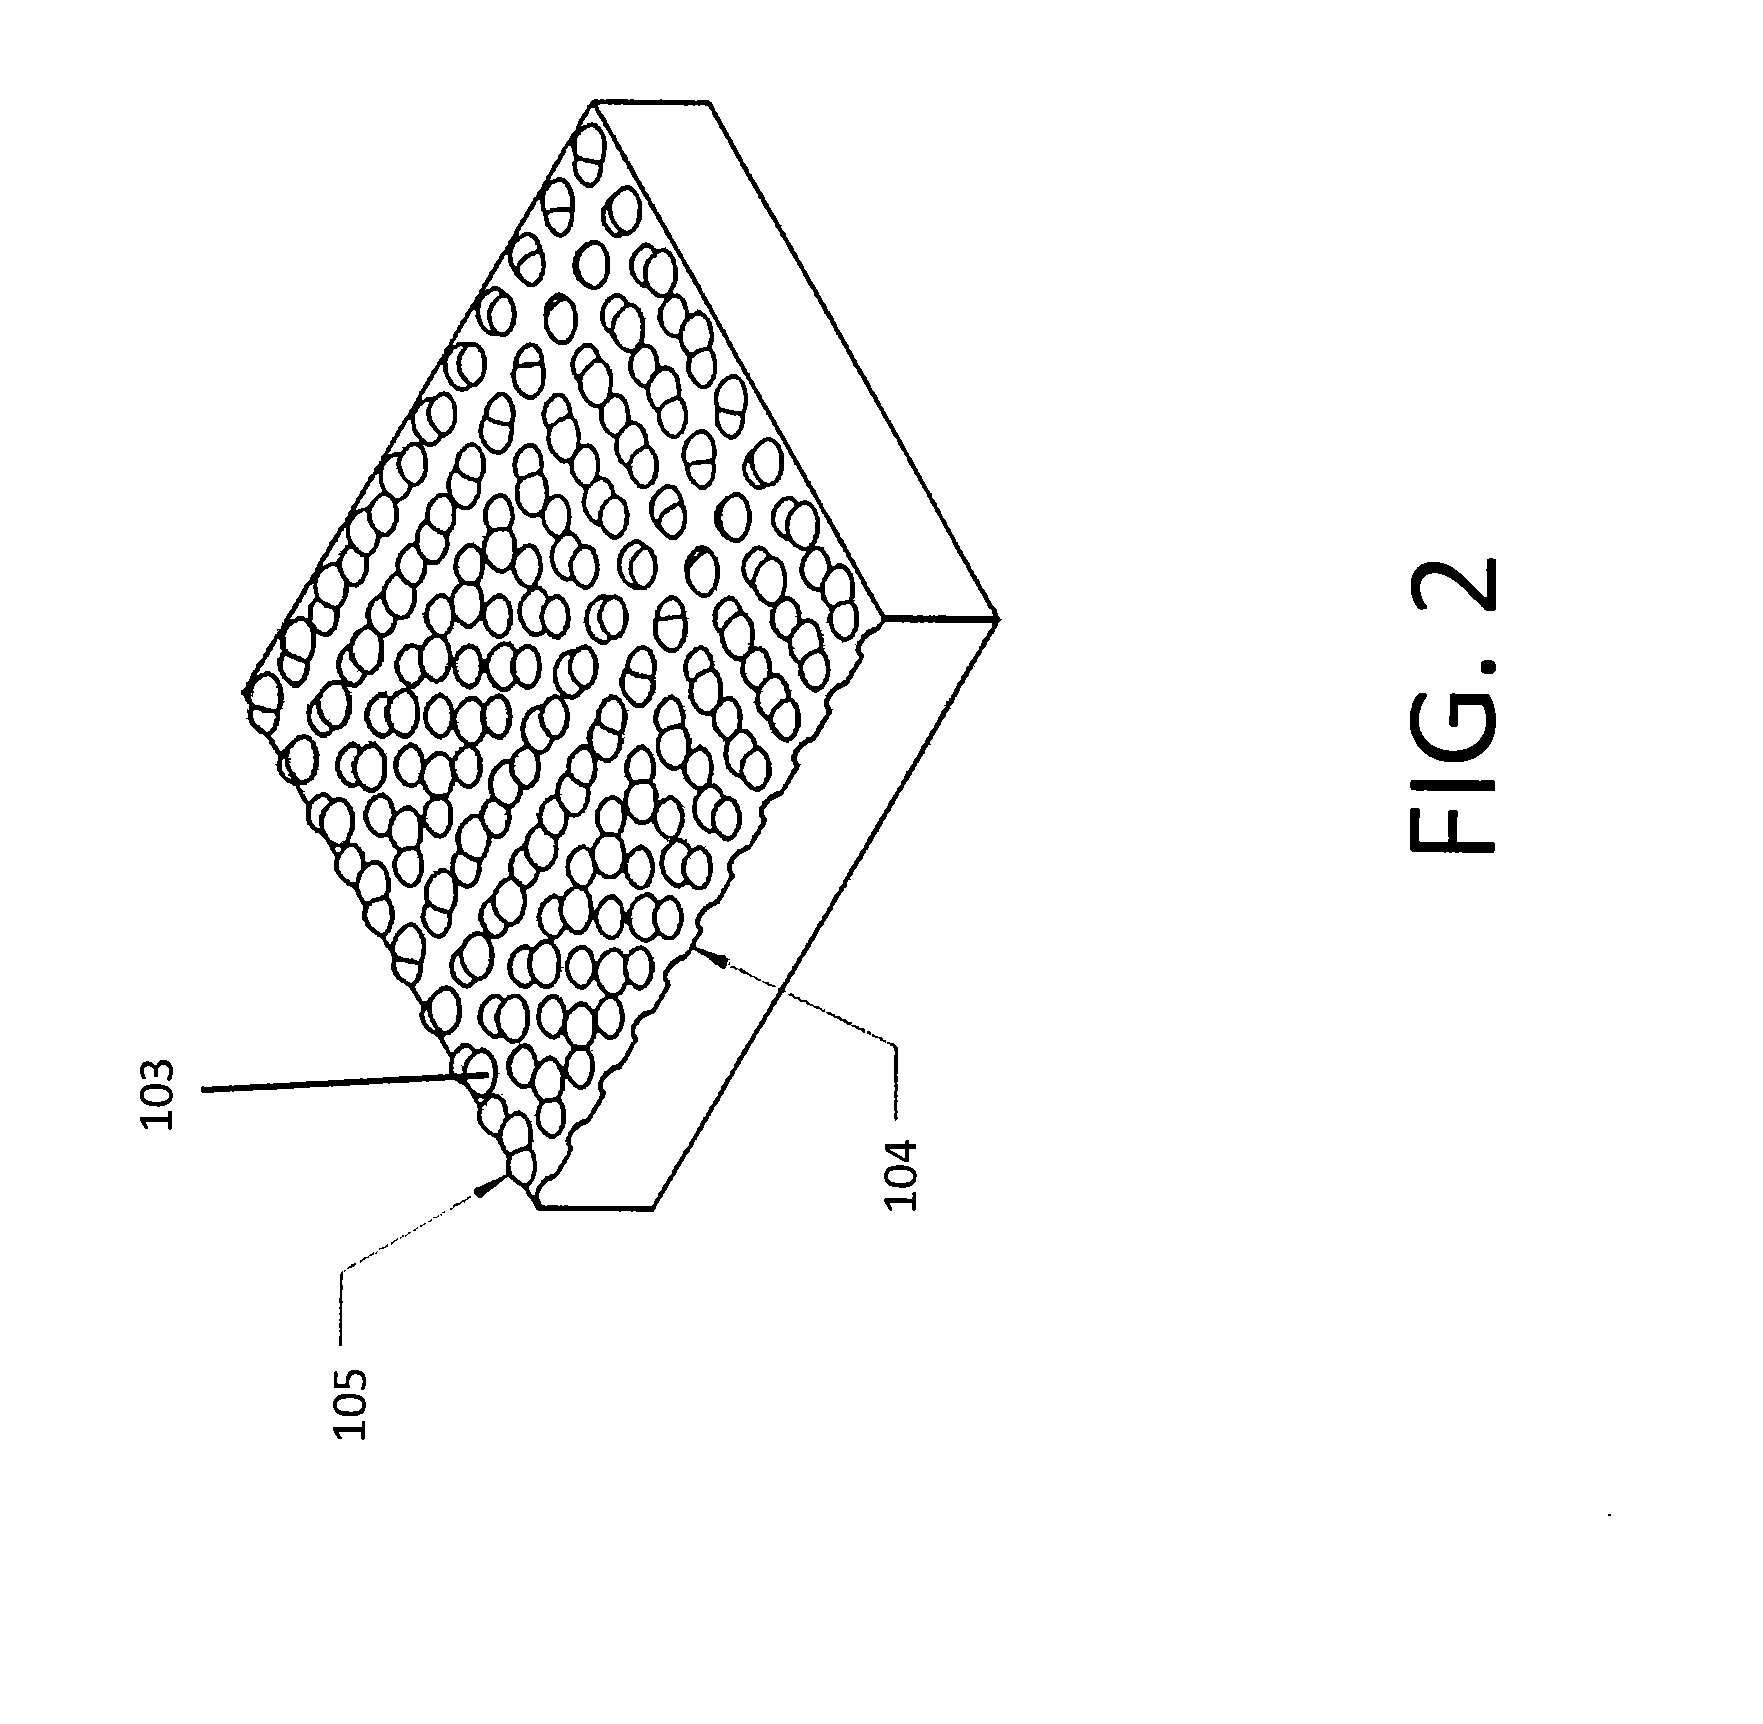 Processes for producing regular repeating patterns on surfaces of interbody devices